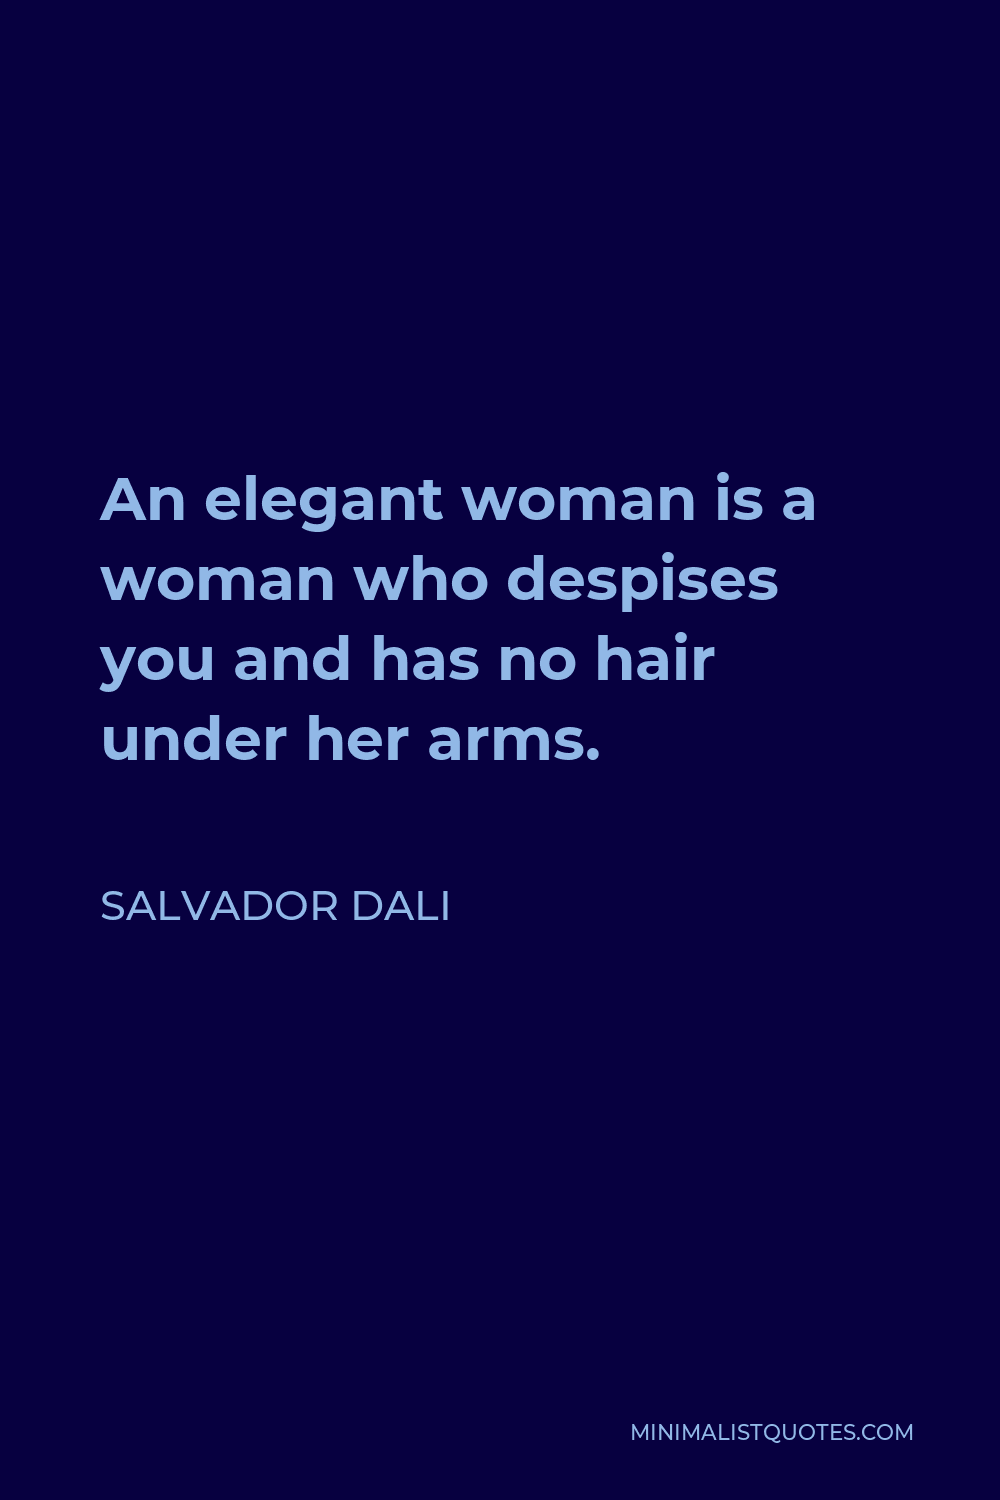 Salvador Dali Quote - An elegant woman is a woman who despises you and has no hair under her arms.